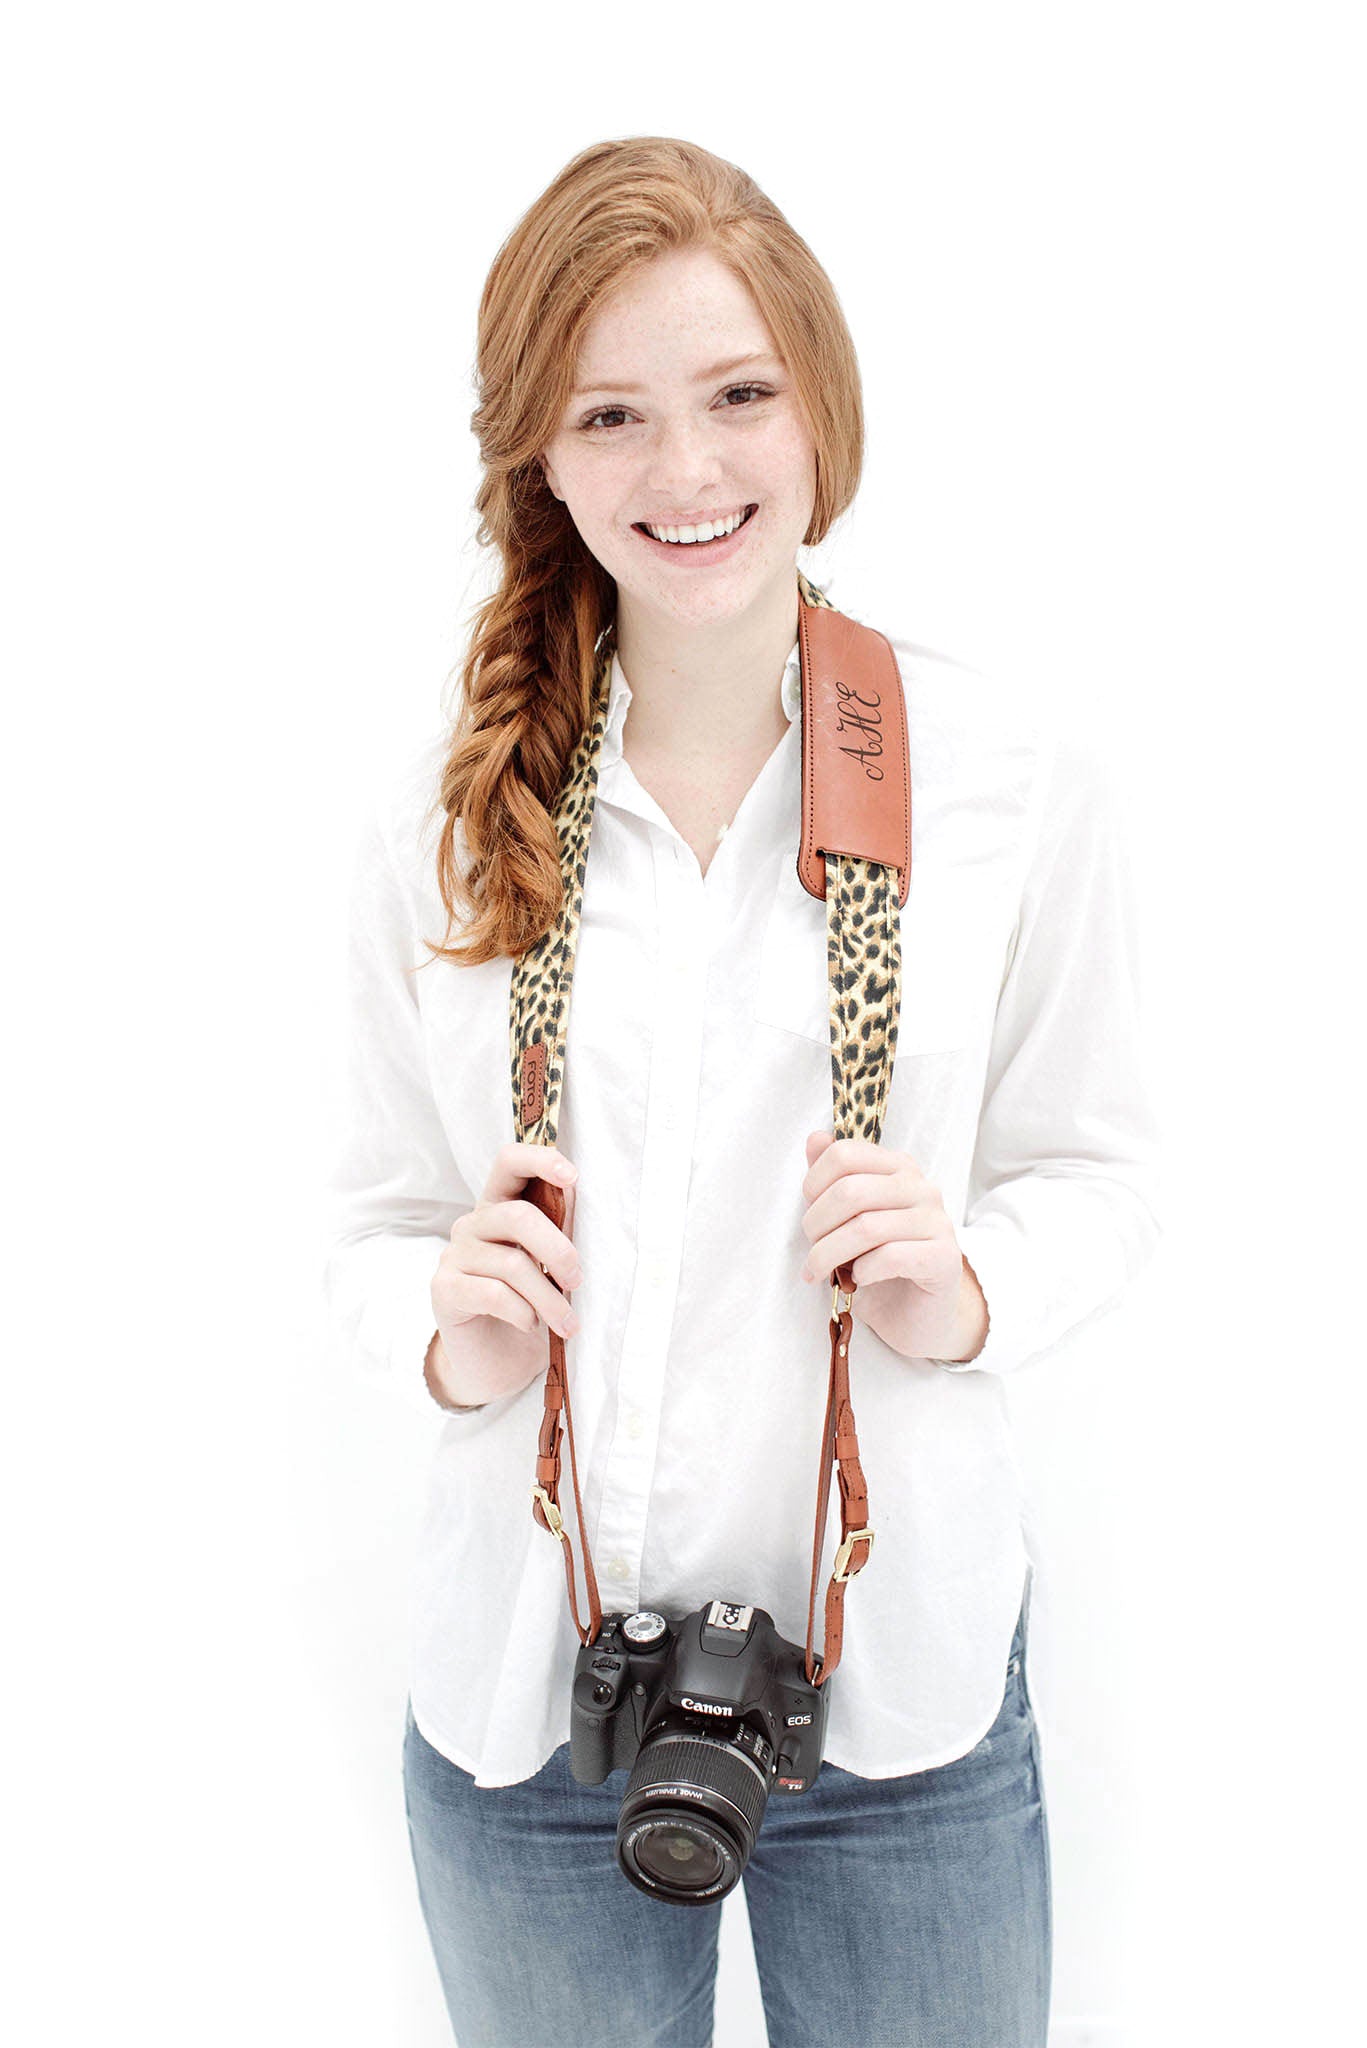 FOTO | Leopard Fotostrap - a leopard print canvas and genuine leather camera strap that can be personalized with a monogram or business logo, making it the perfect personalized gift! 